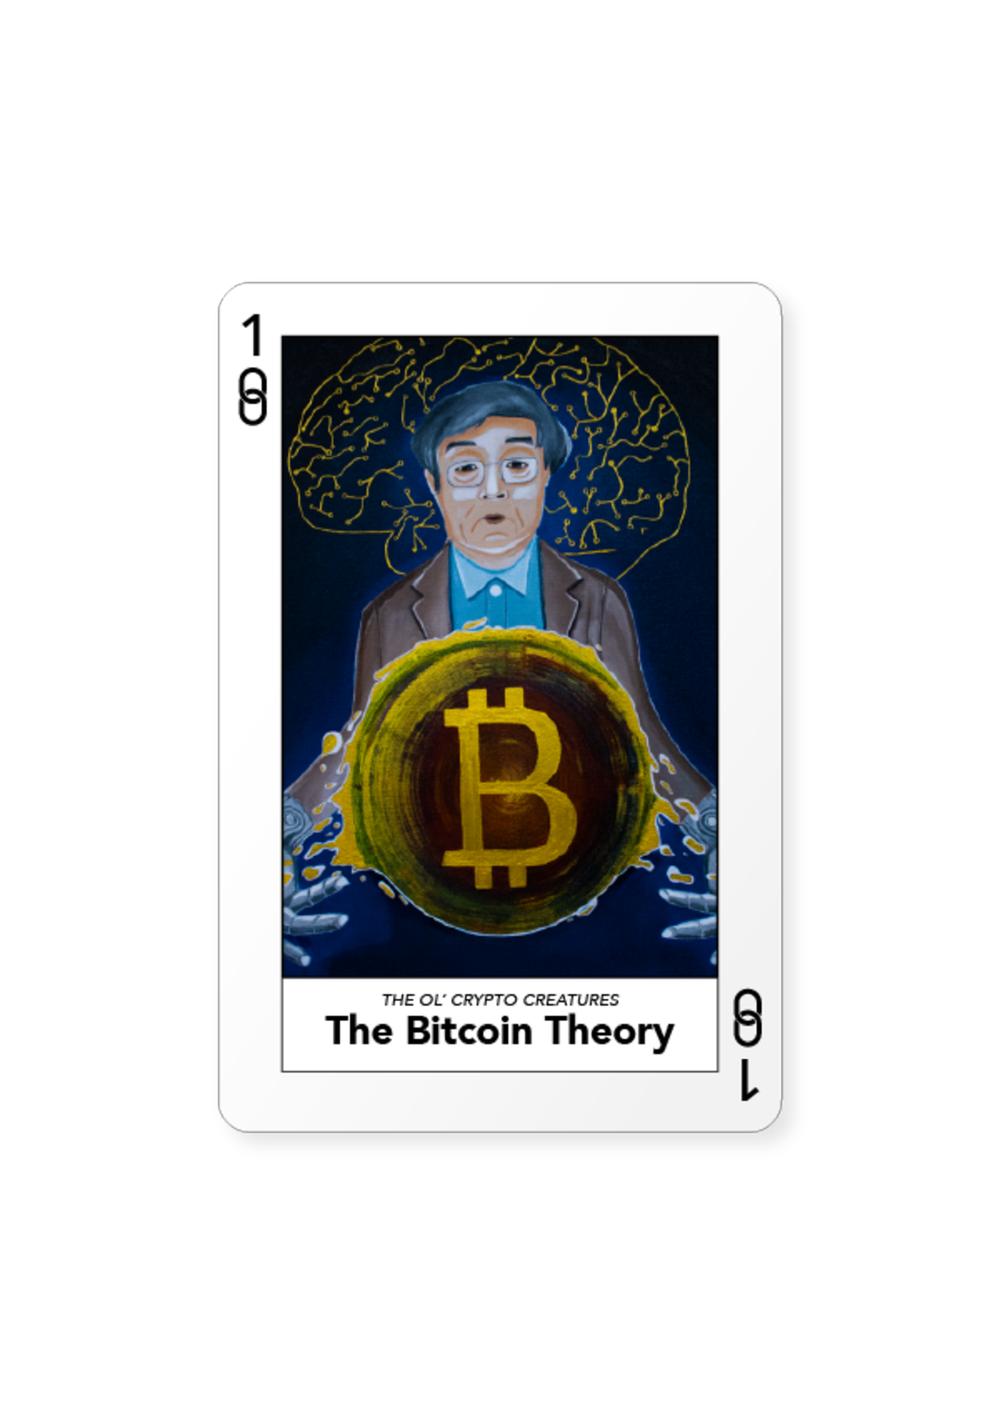 Certificate of Authenticity and Consignment The Bitcoin Theory